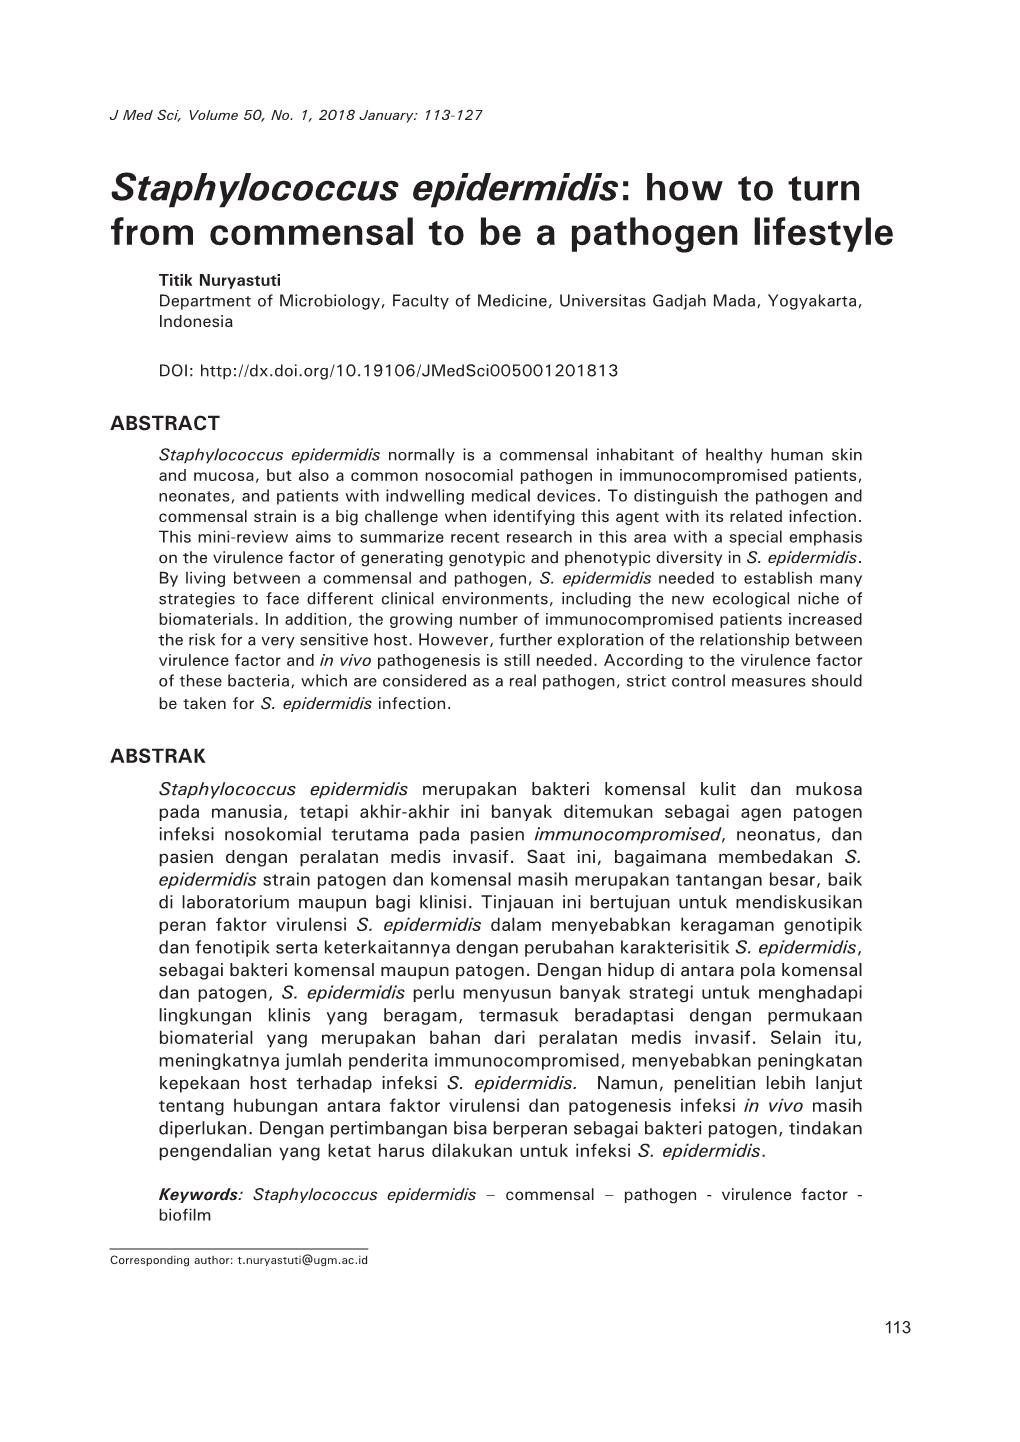 Staphylococcus Epidermidis: How to Turn from Commensal to Be a Pathogen Lifestyle